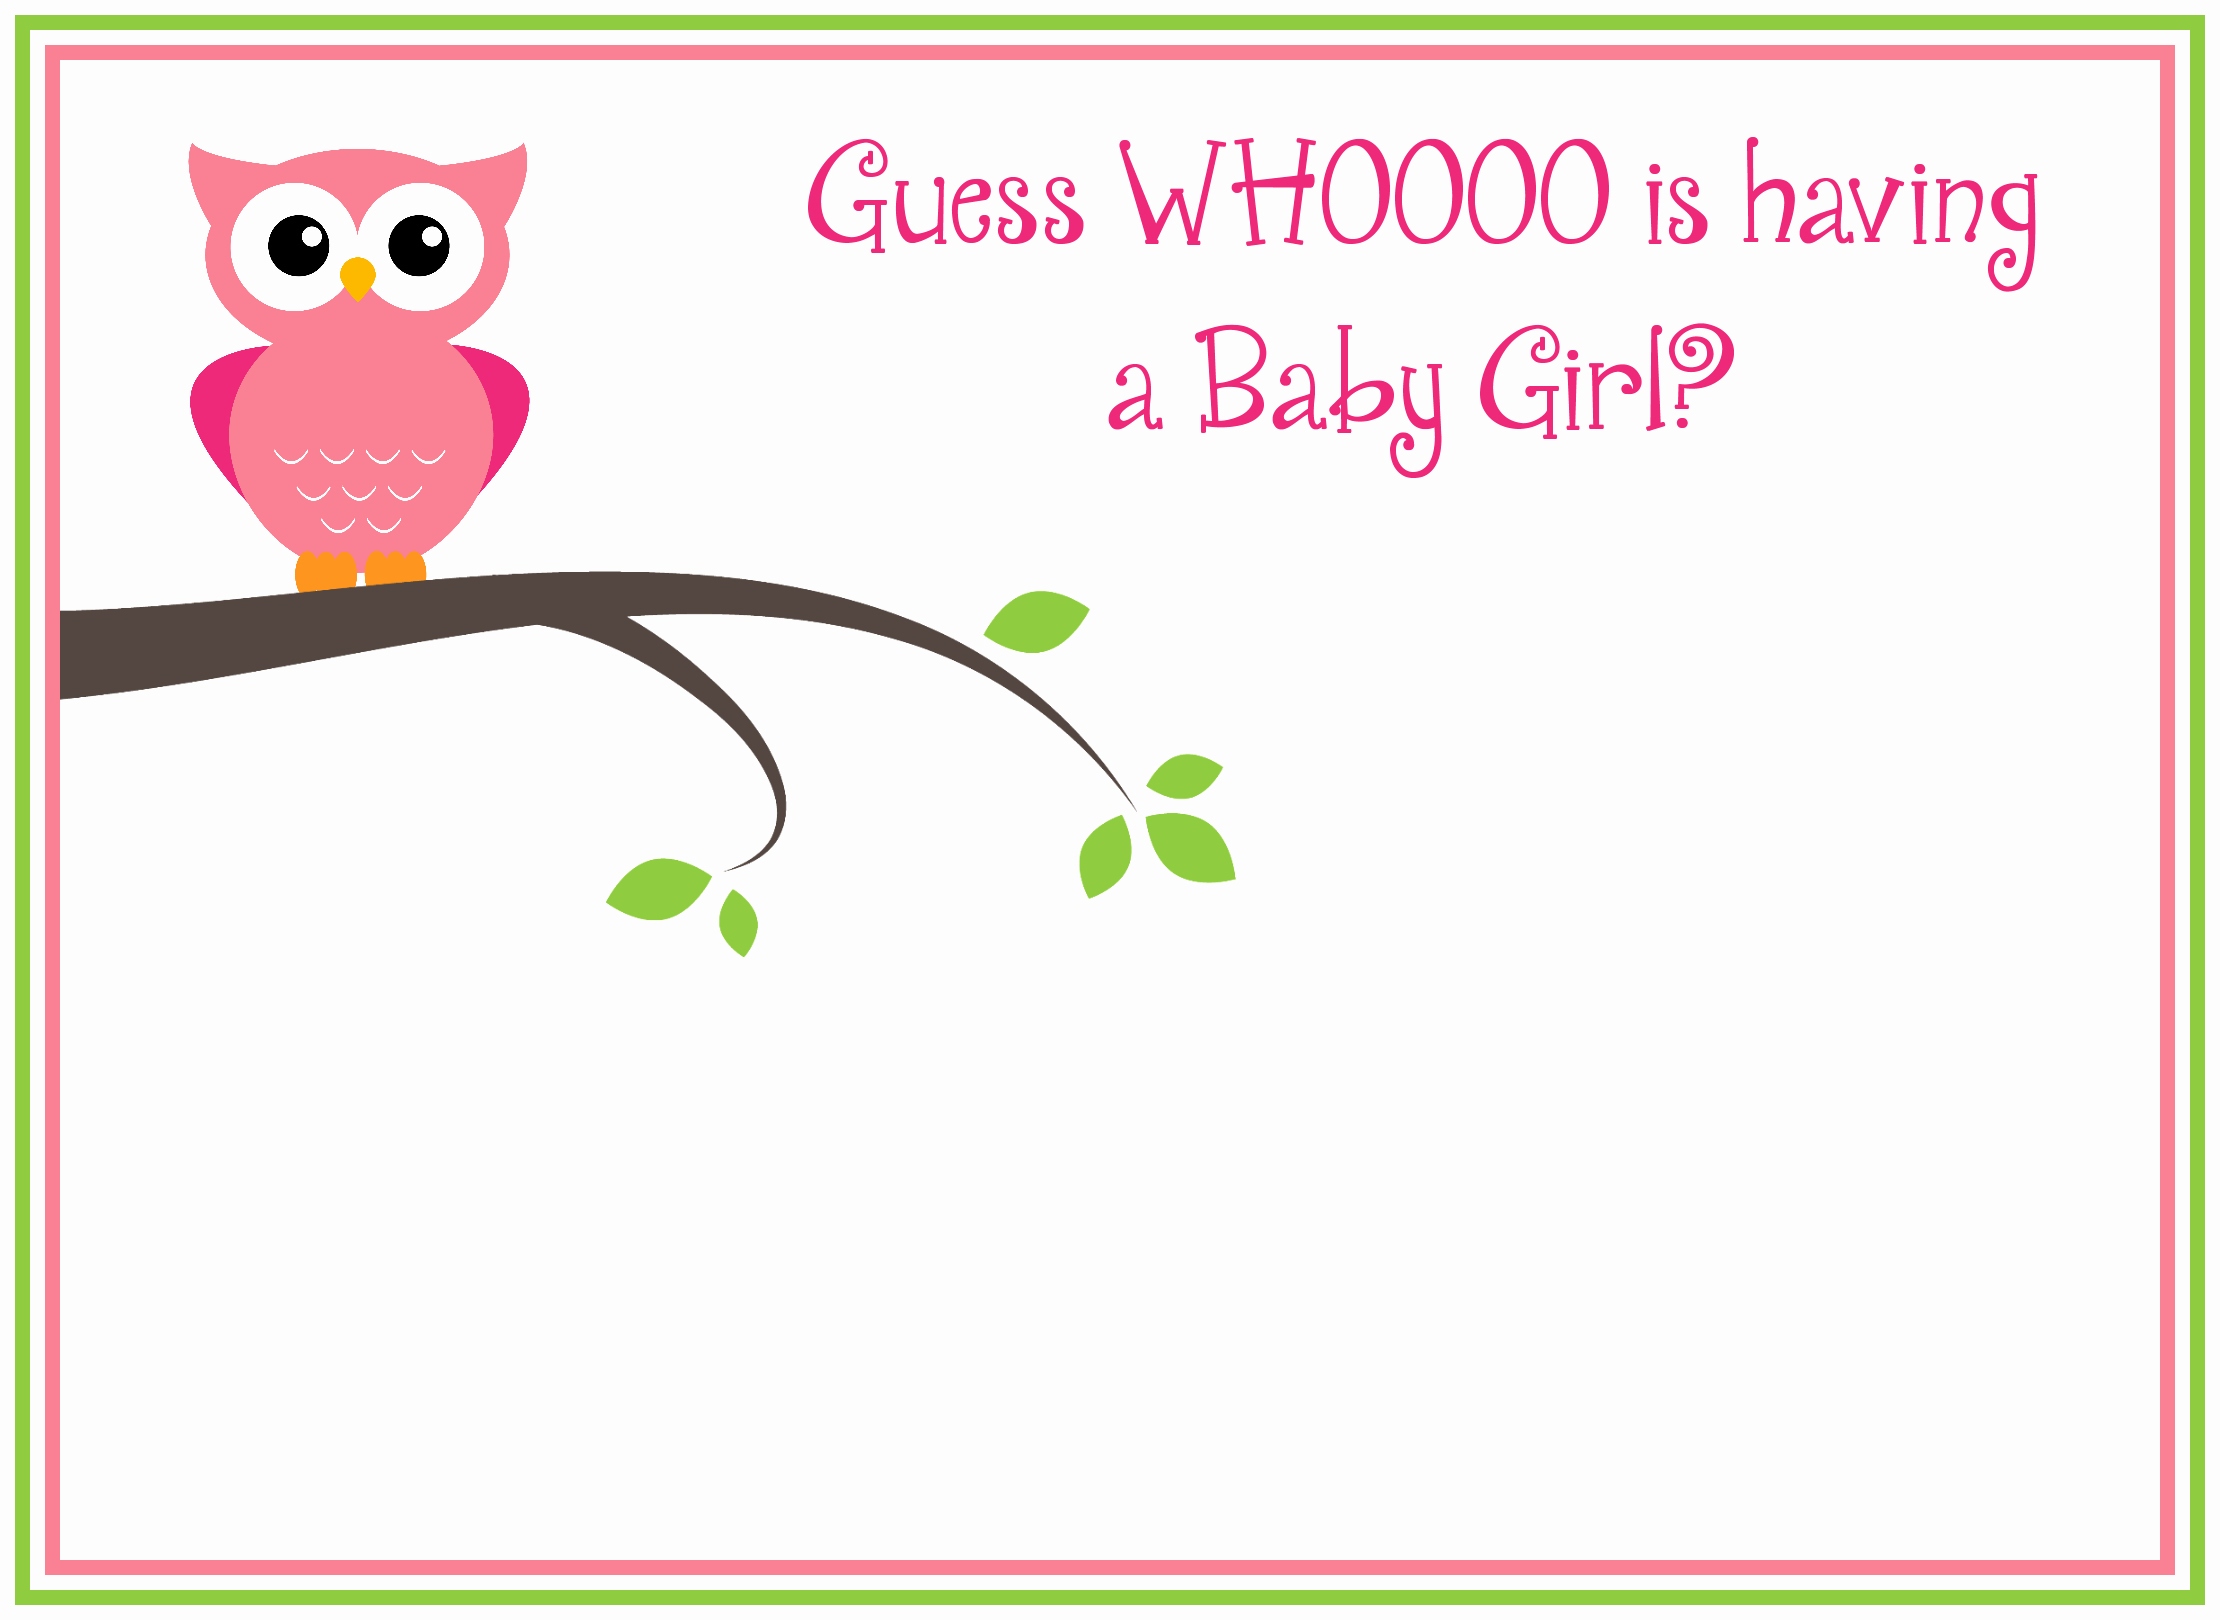 Baby Shower Invitation Images Awesome Baby Clipart Invitation Shower Png and Cliparts for Free